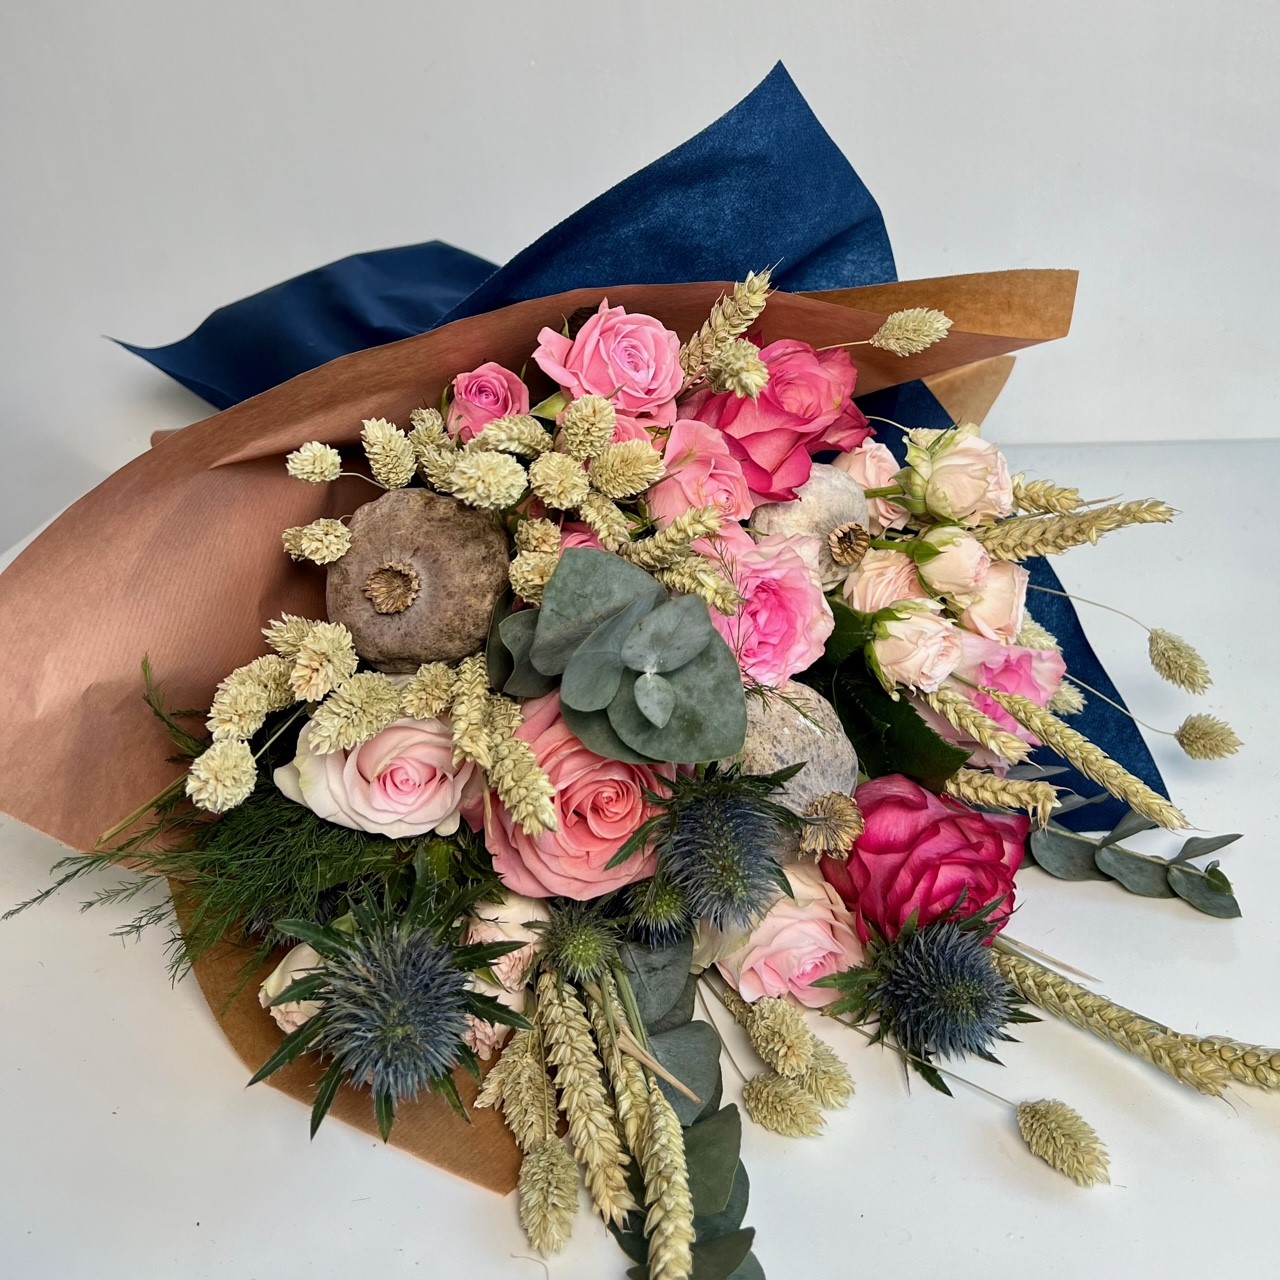 BOHO COMPO OF PINK ROSES MINI ROSES ERINGIUM AND DRY FLOWERS